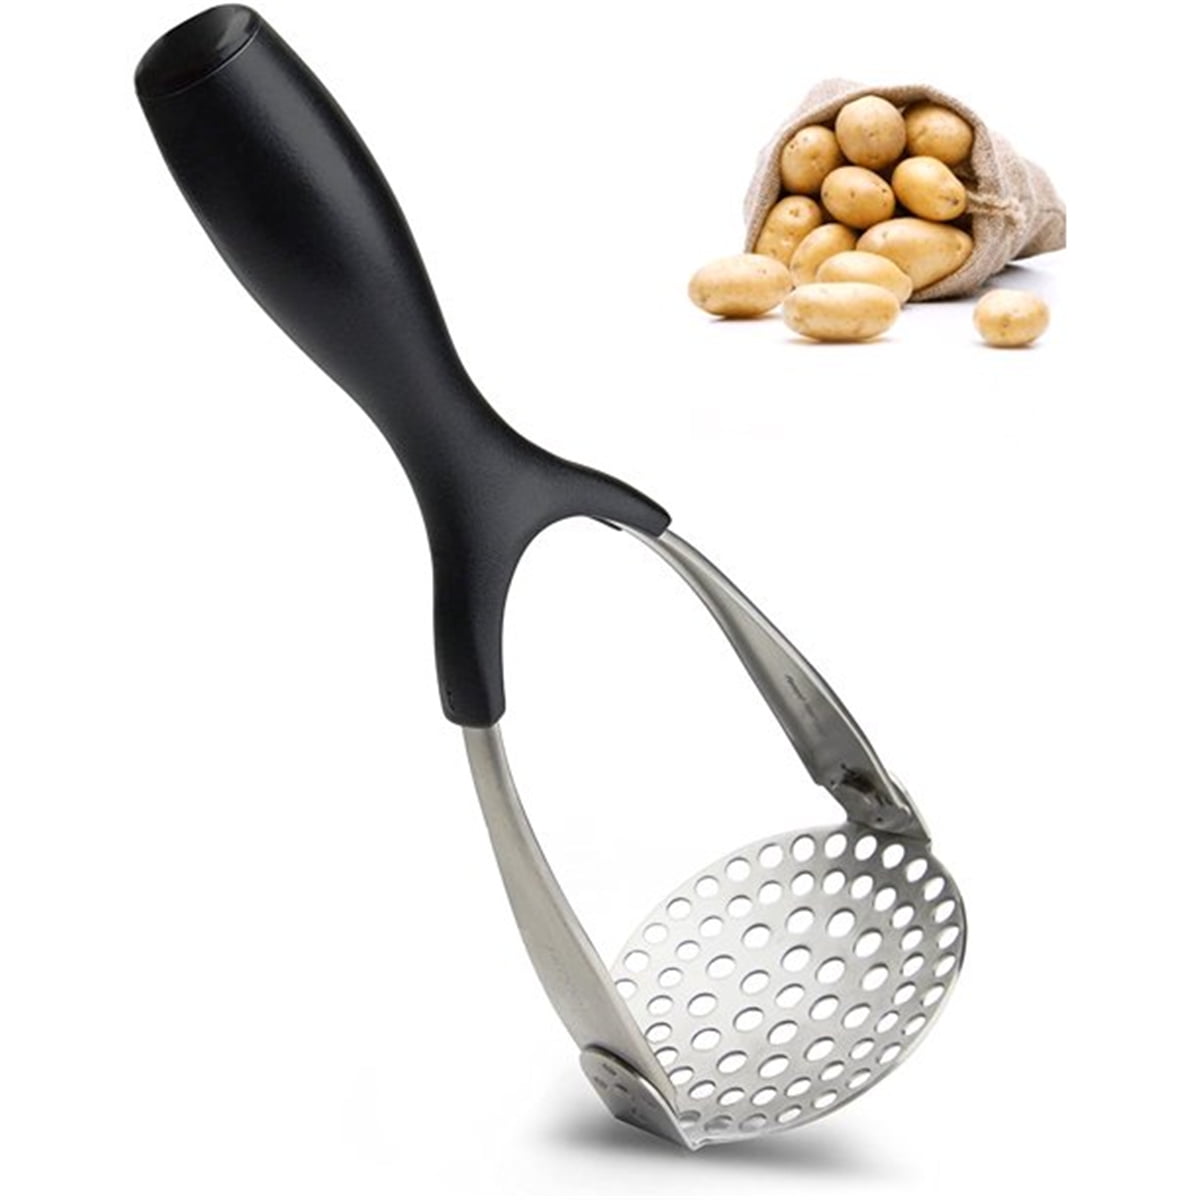 Social Chef Hand Held Potato Masher - Professional Stainless Steel